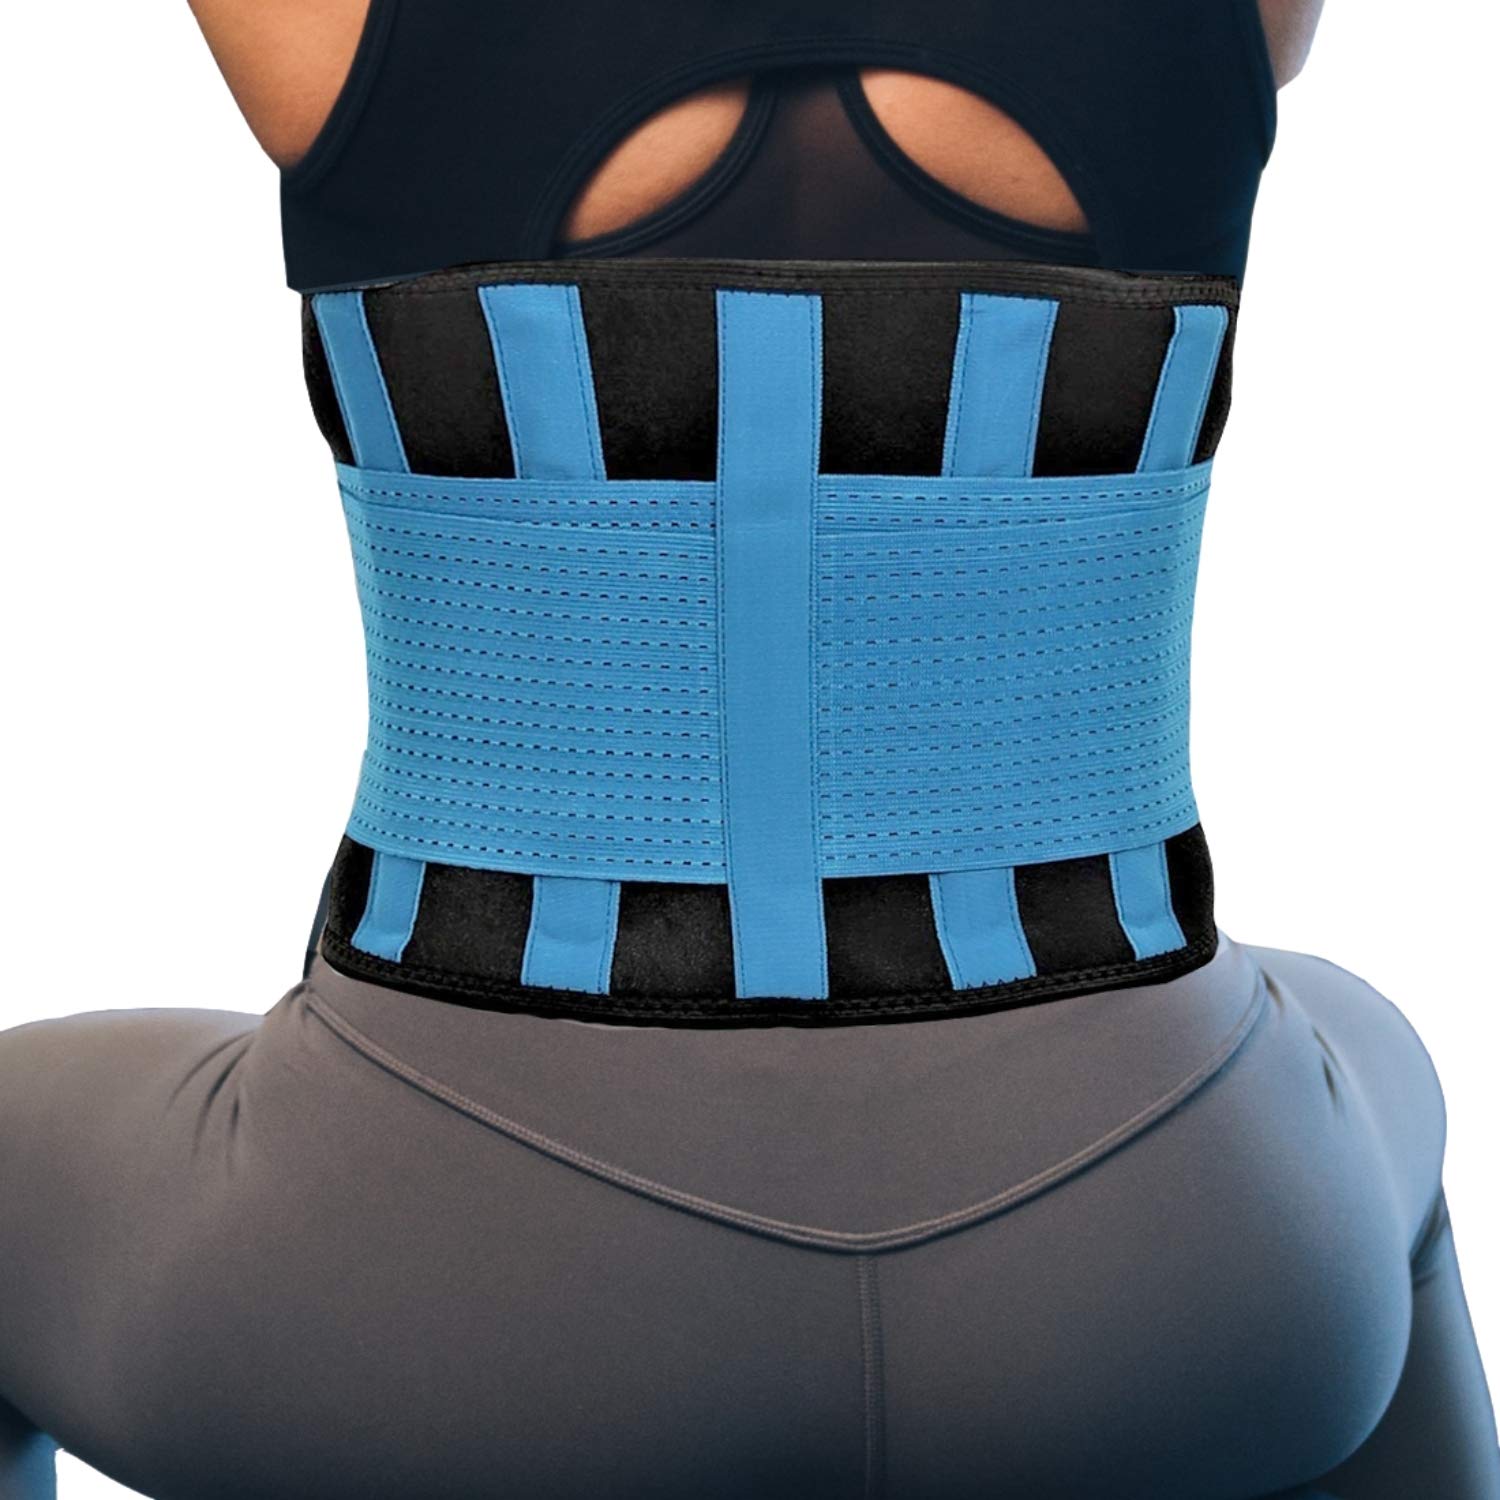 How Lumbar Support Belt Can Reduce Your Back Discomfort